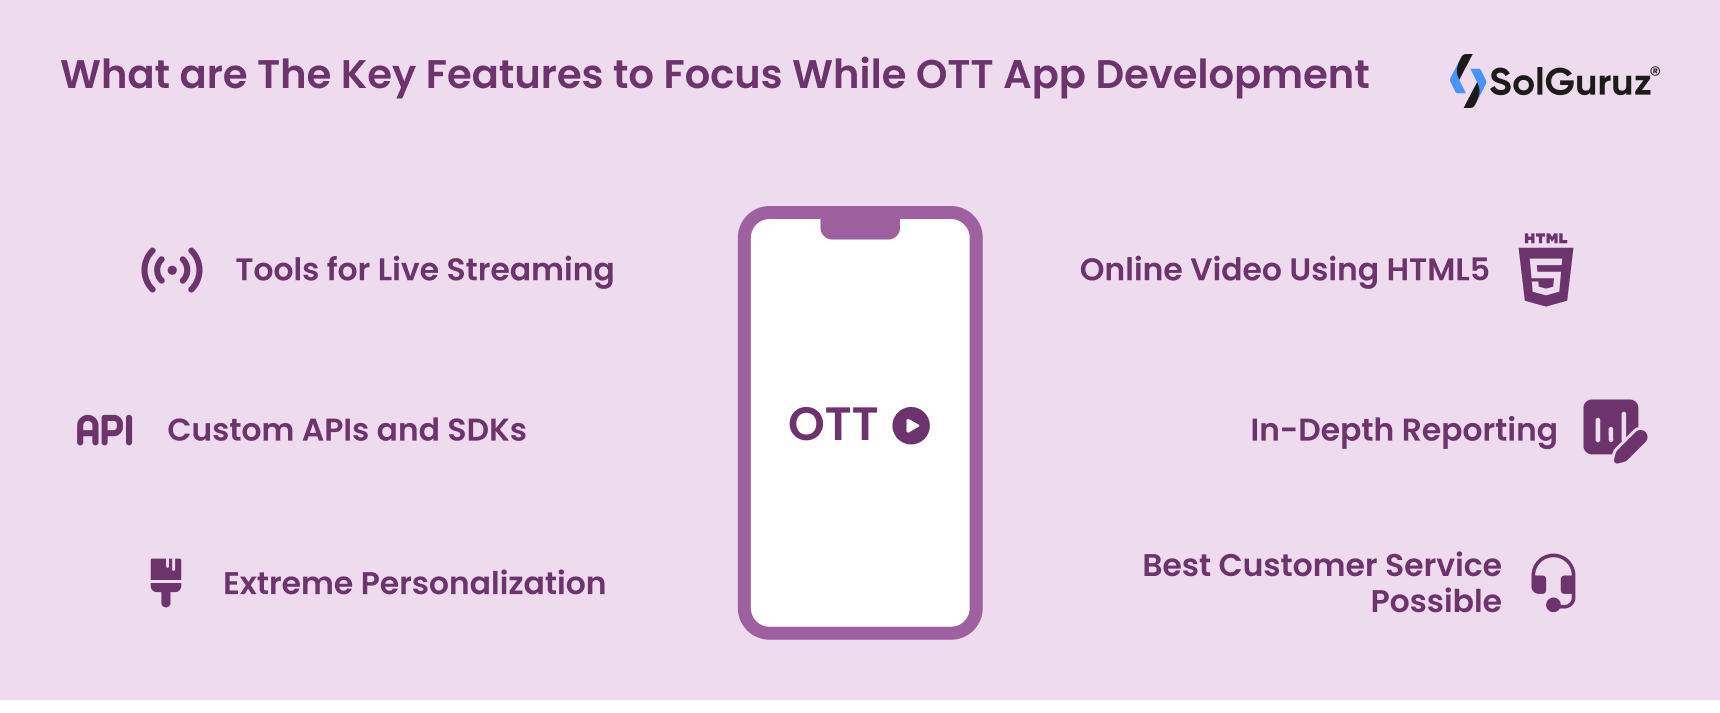 What are The Key Features to Focus While OTT App Development